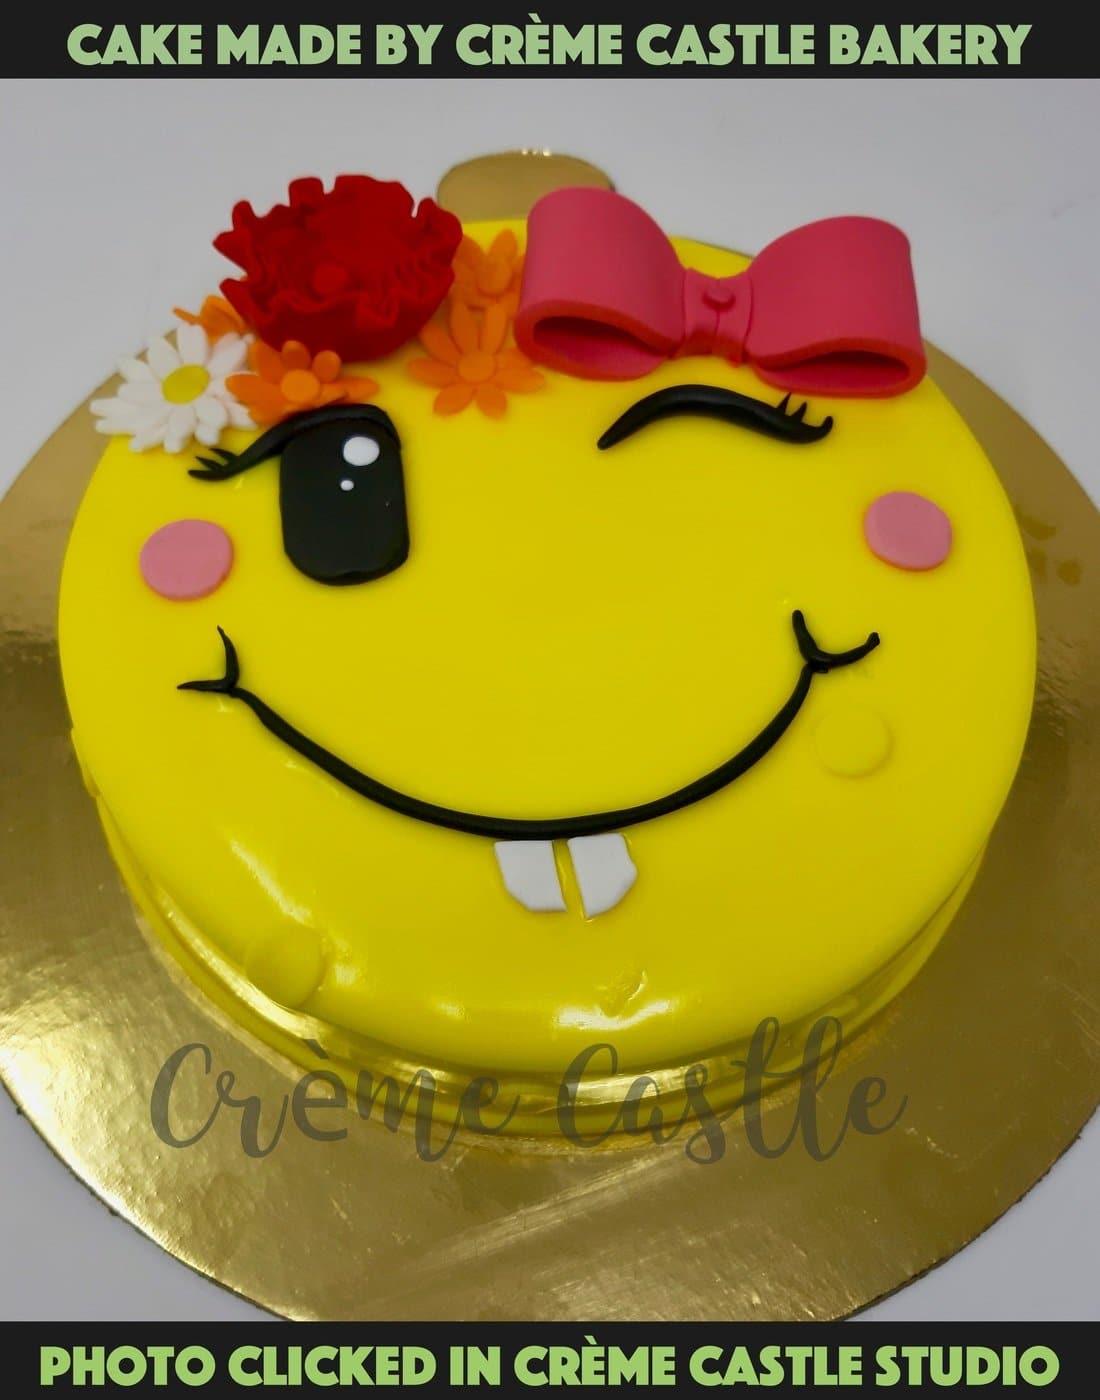 Buy/Send Mothers Day Photo Cake Online | Free Delivery - Gift My Emotions